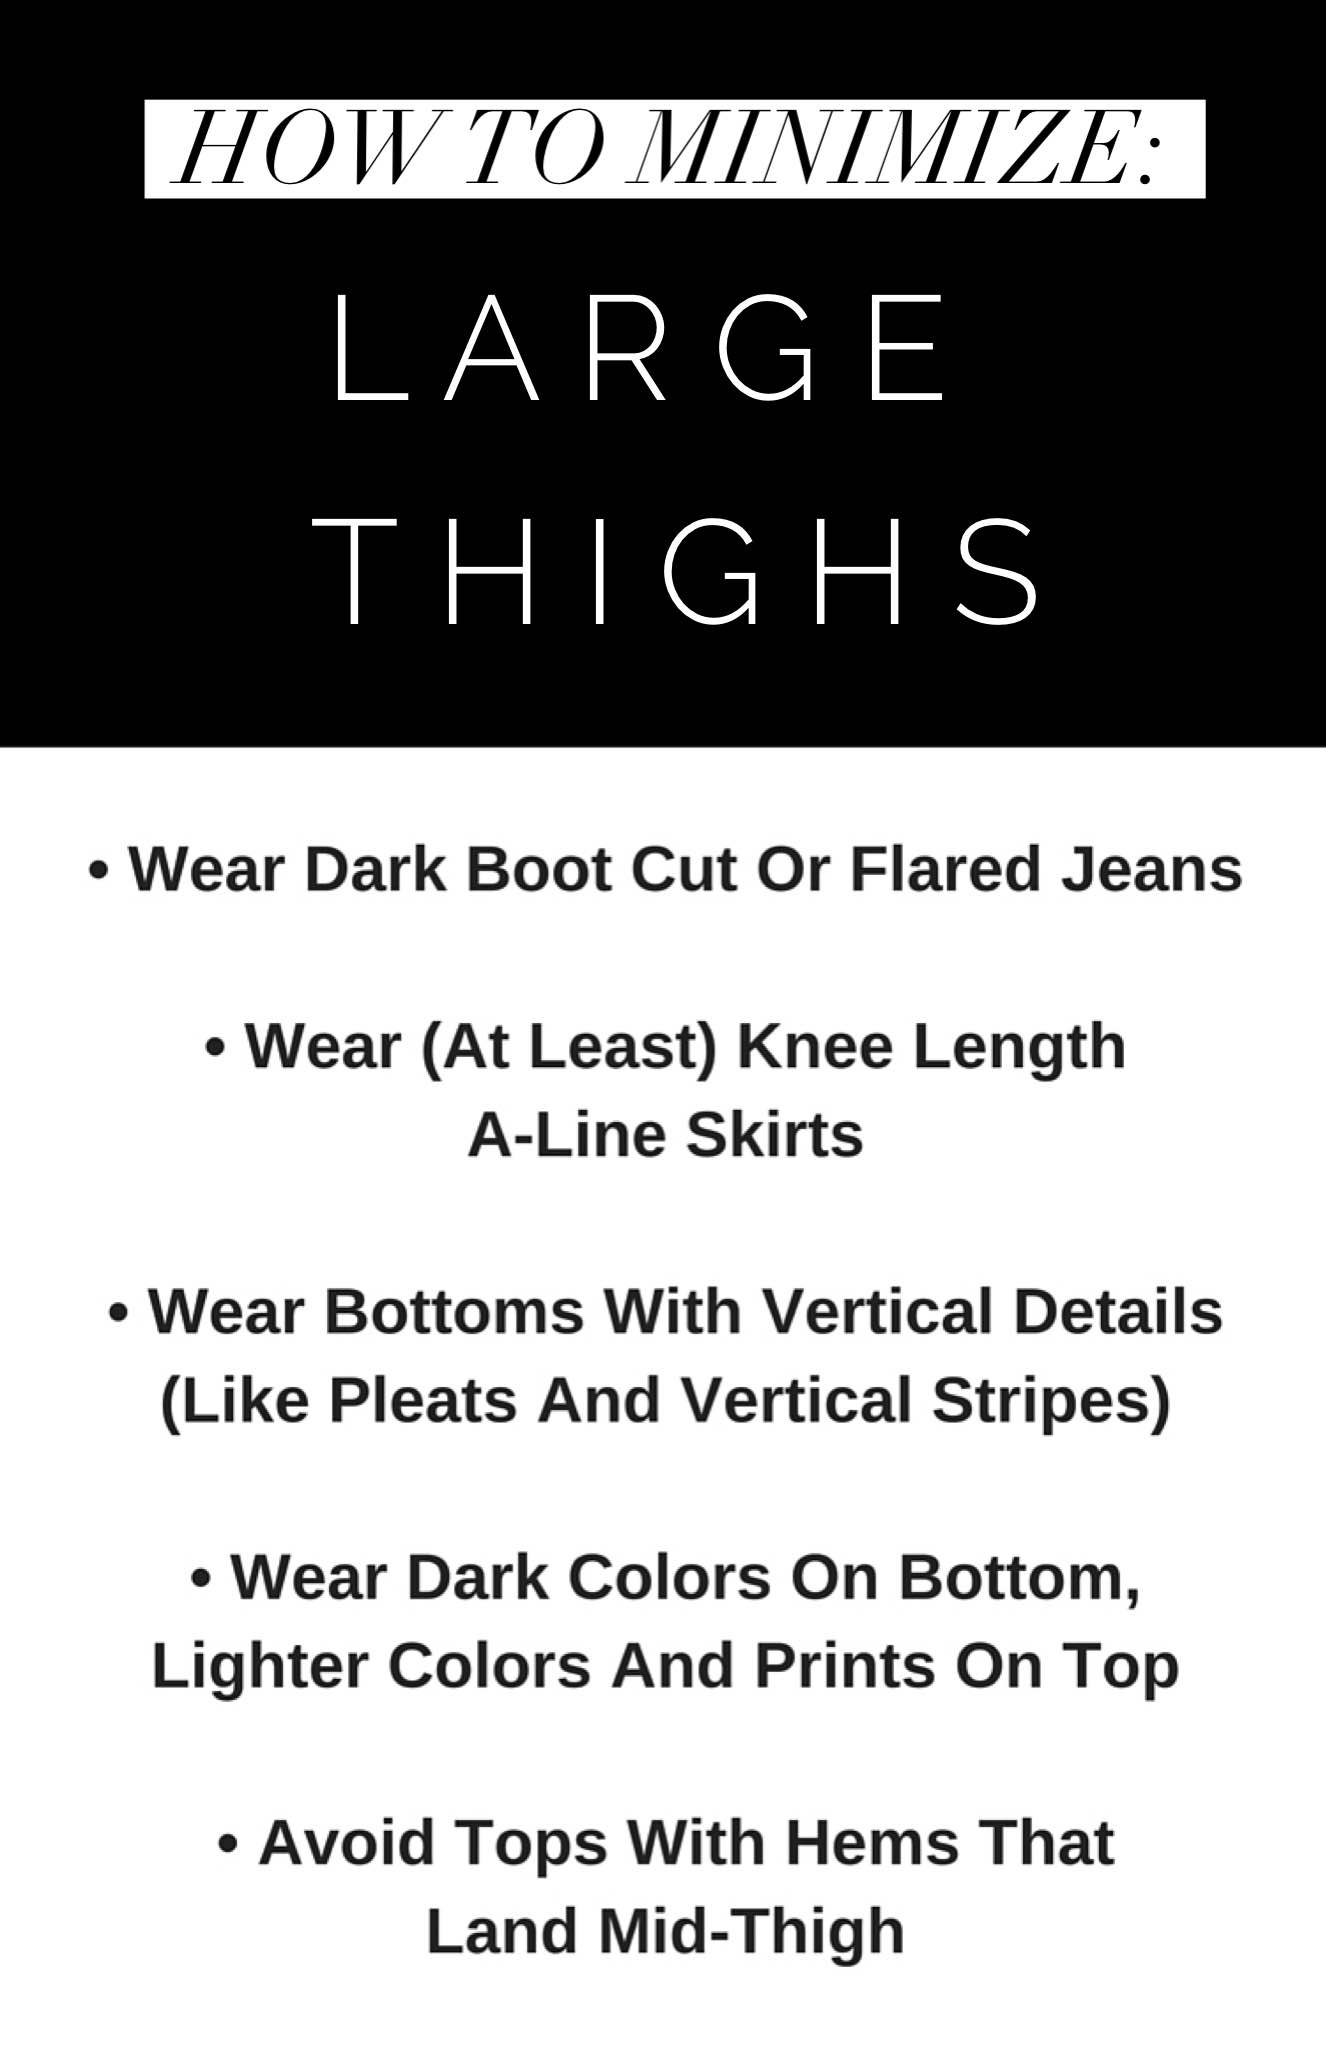 How to Minimize Large Thighs - Downtown Demure